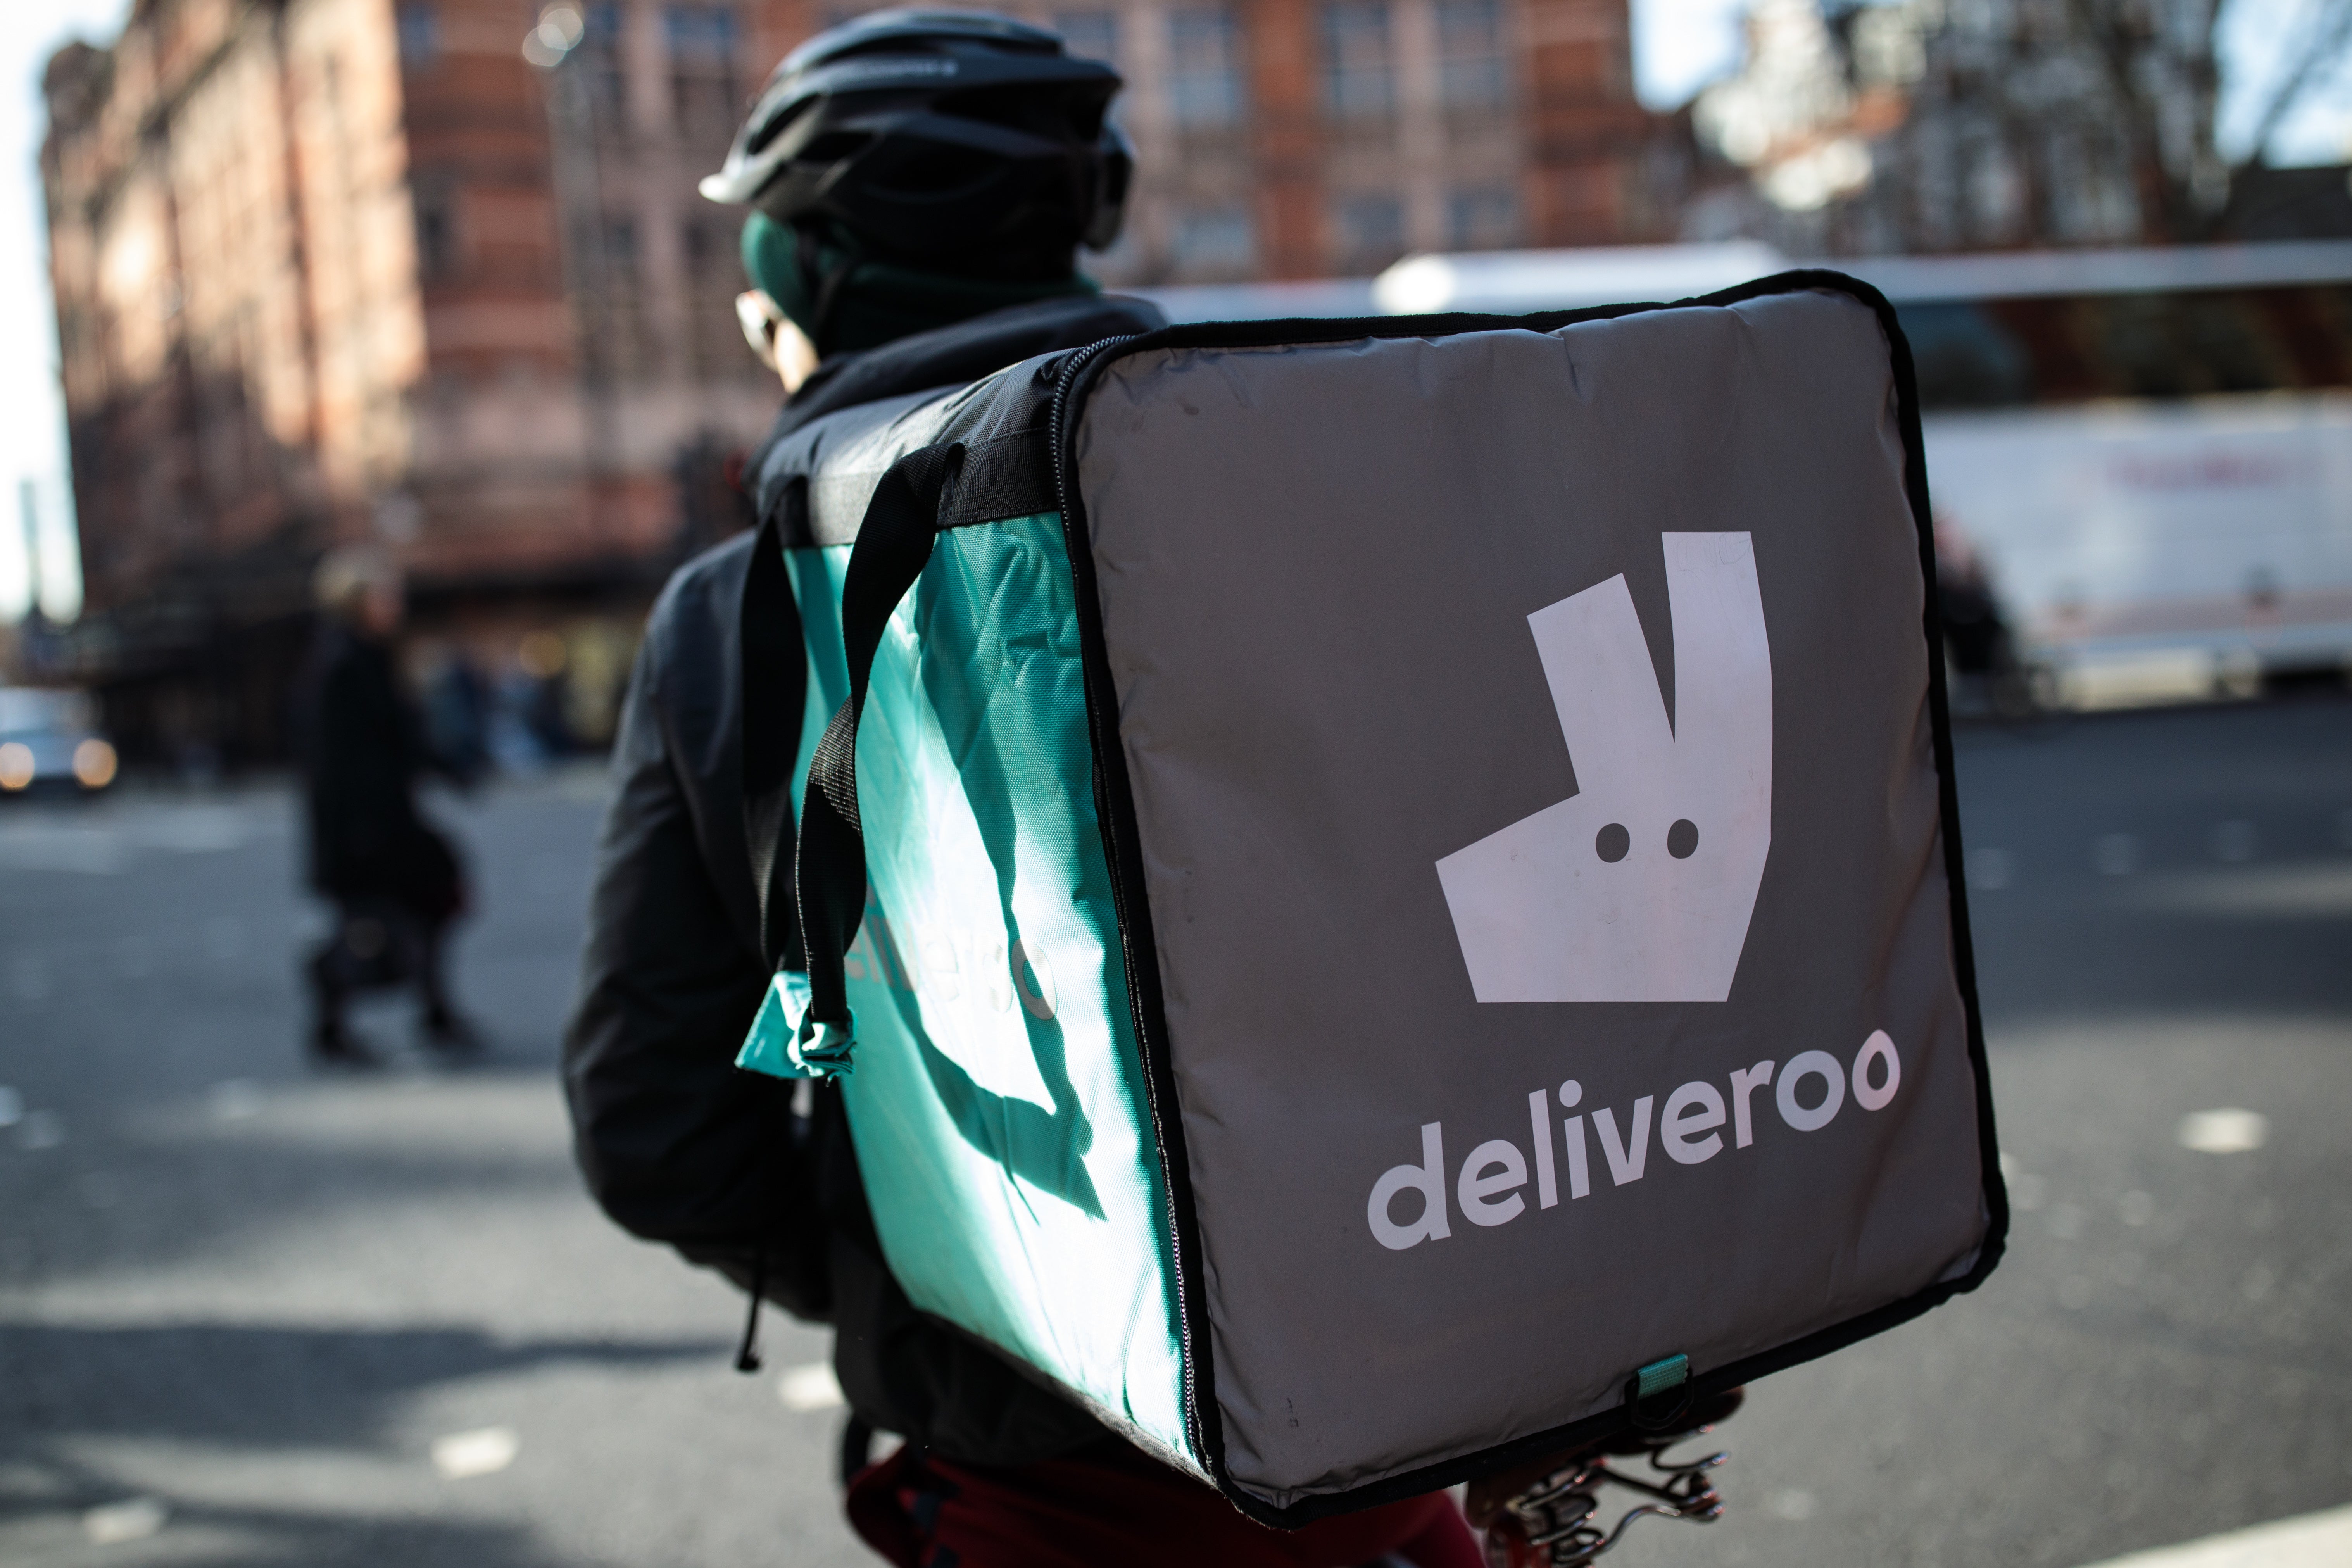 Deliveroo has experienced soaring during the pandemic